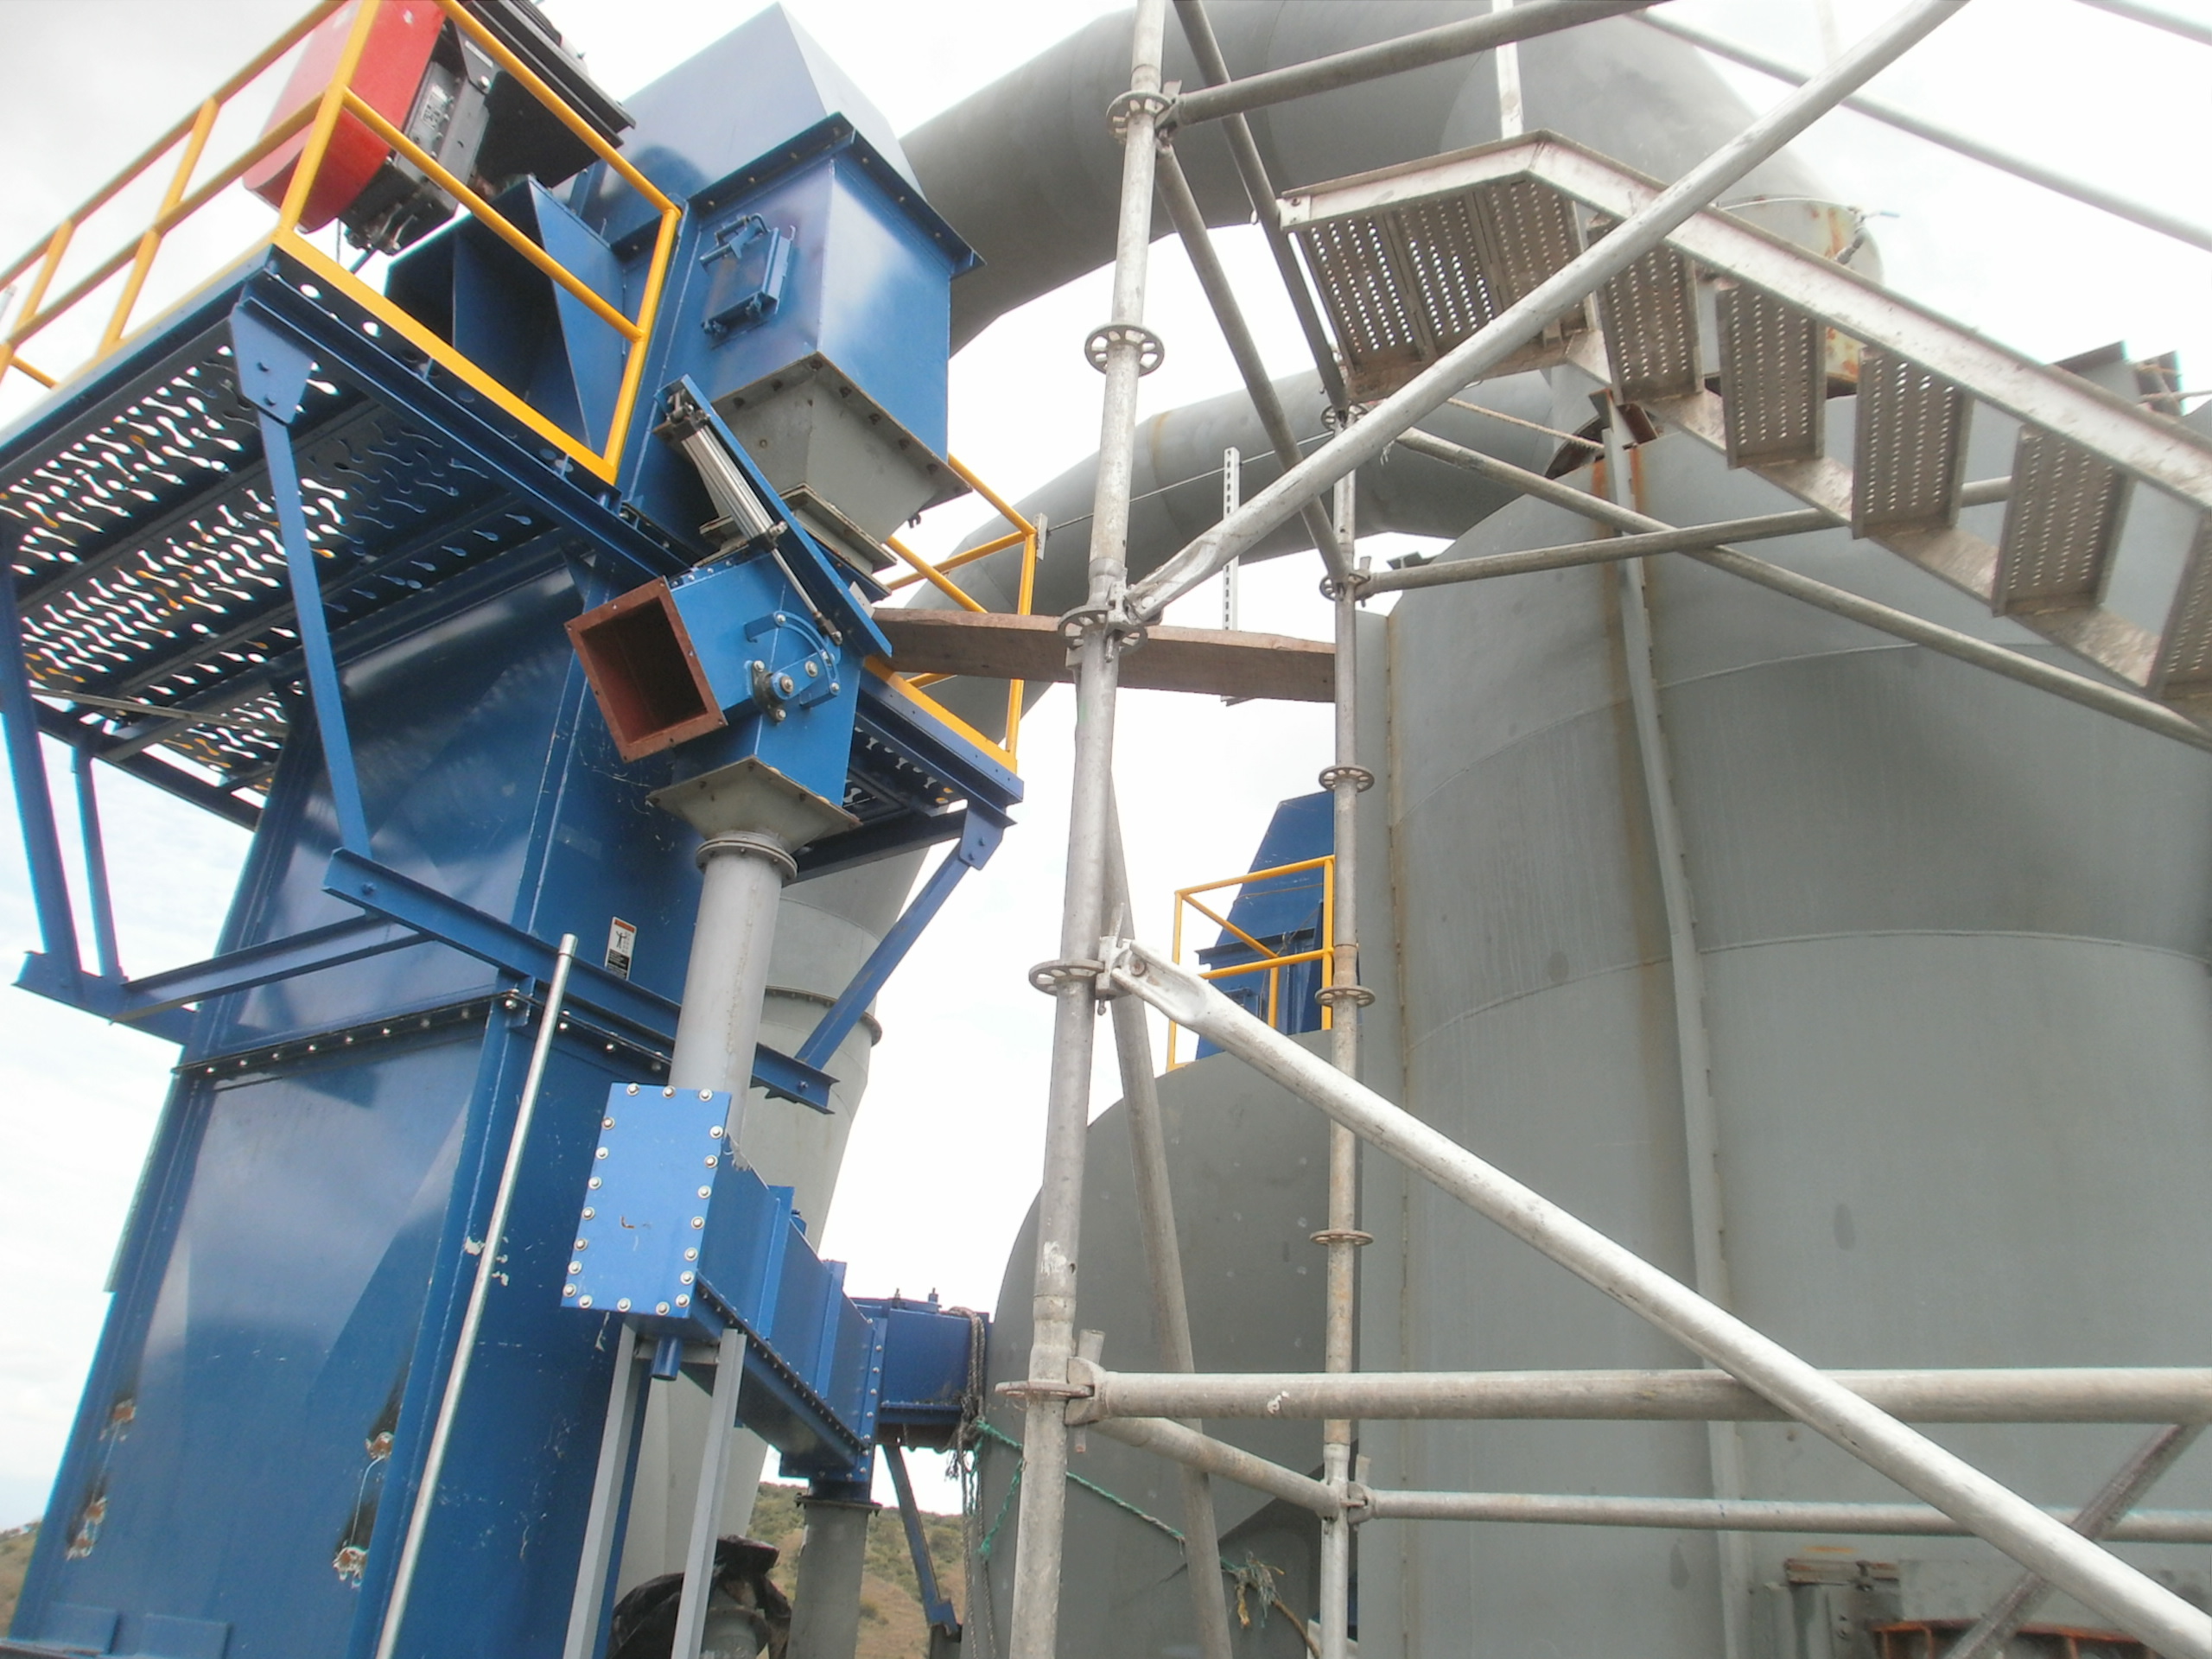 Essential Safety Tips for Working with Bucket Elevators